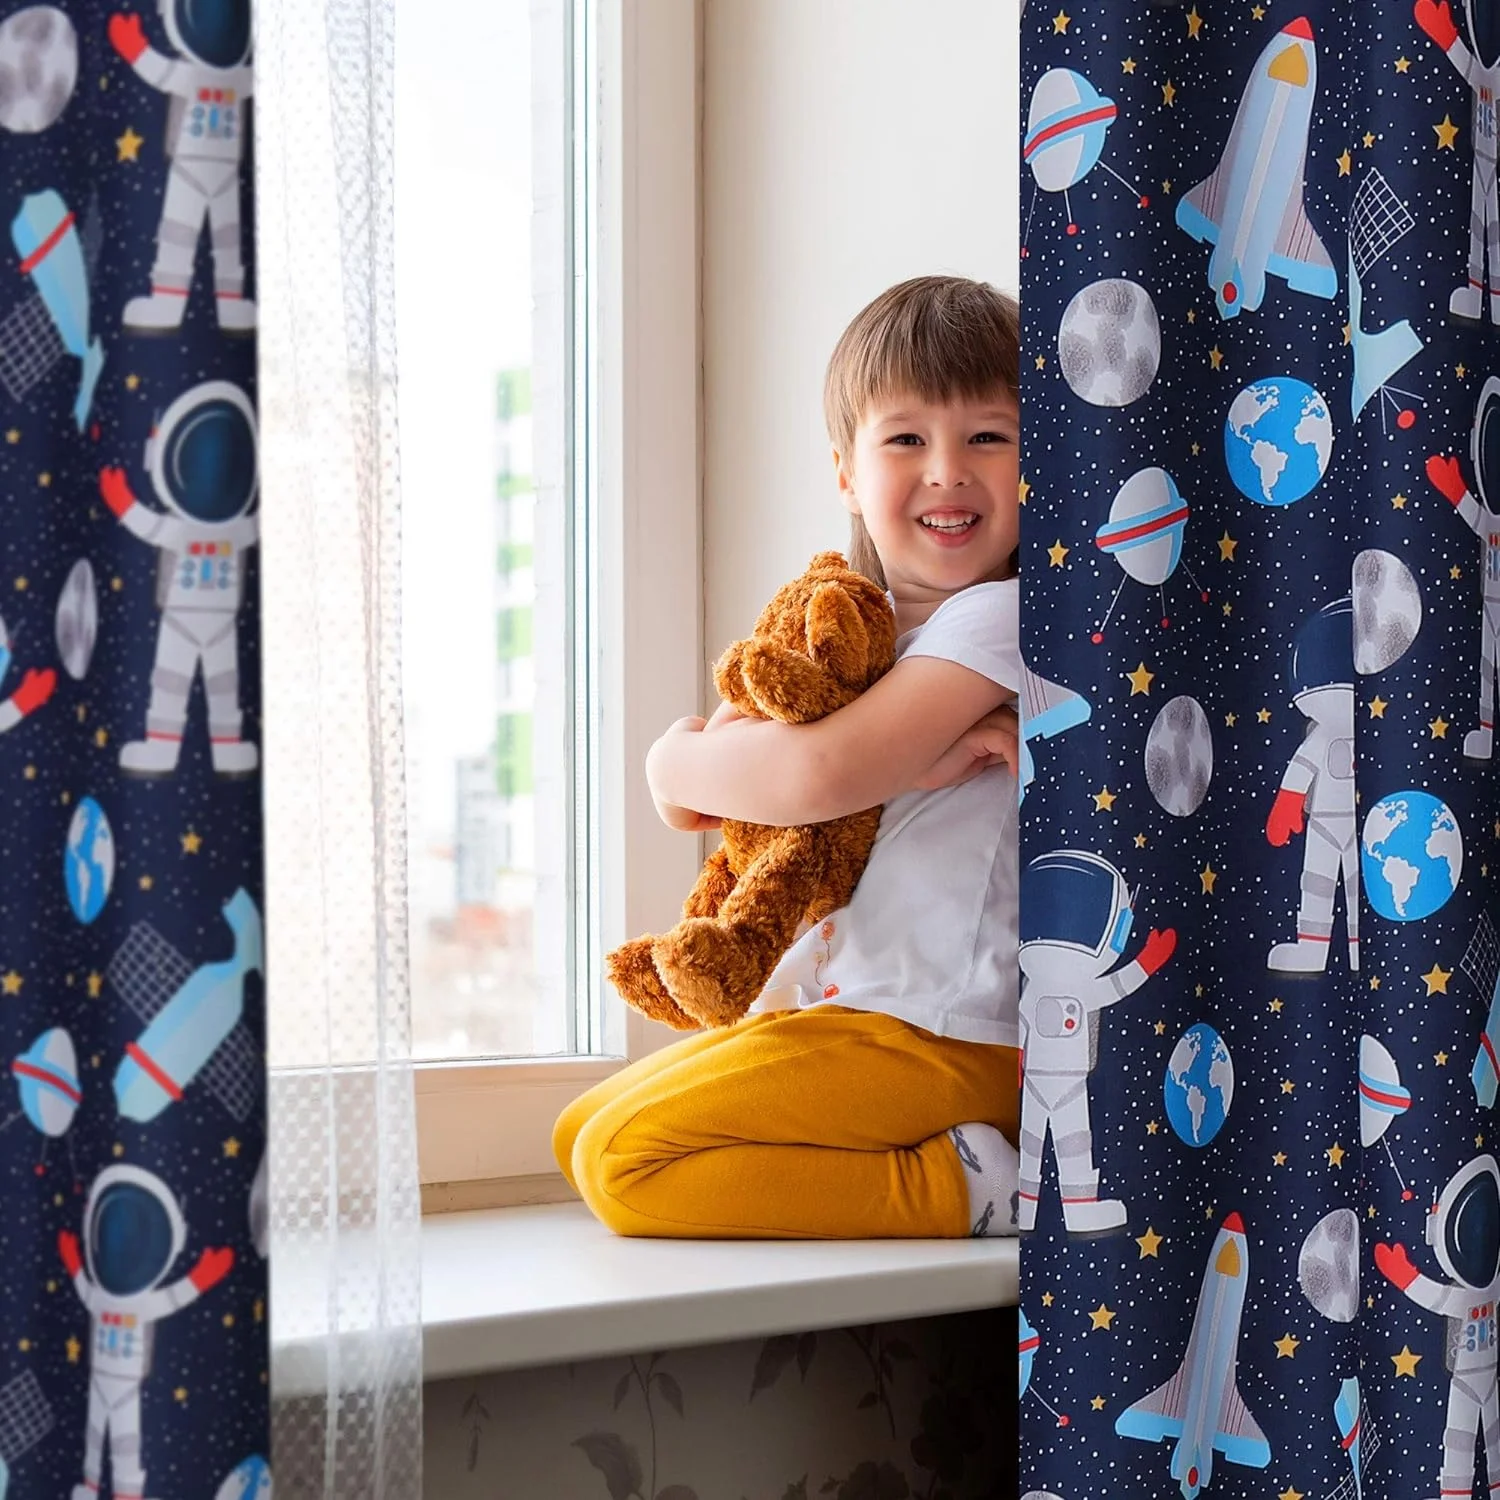 Curtains featuring a whimsical animal print